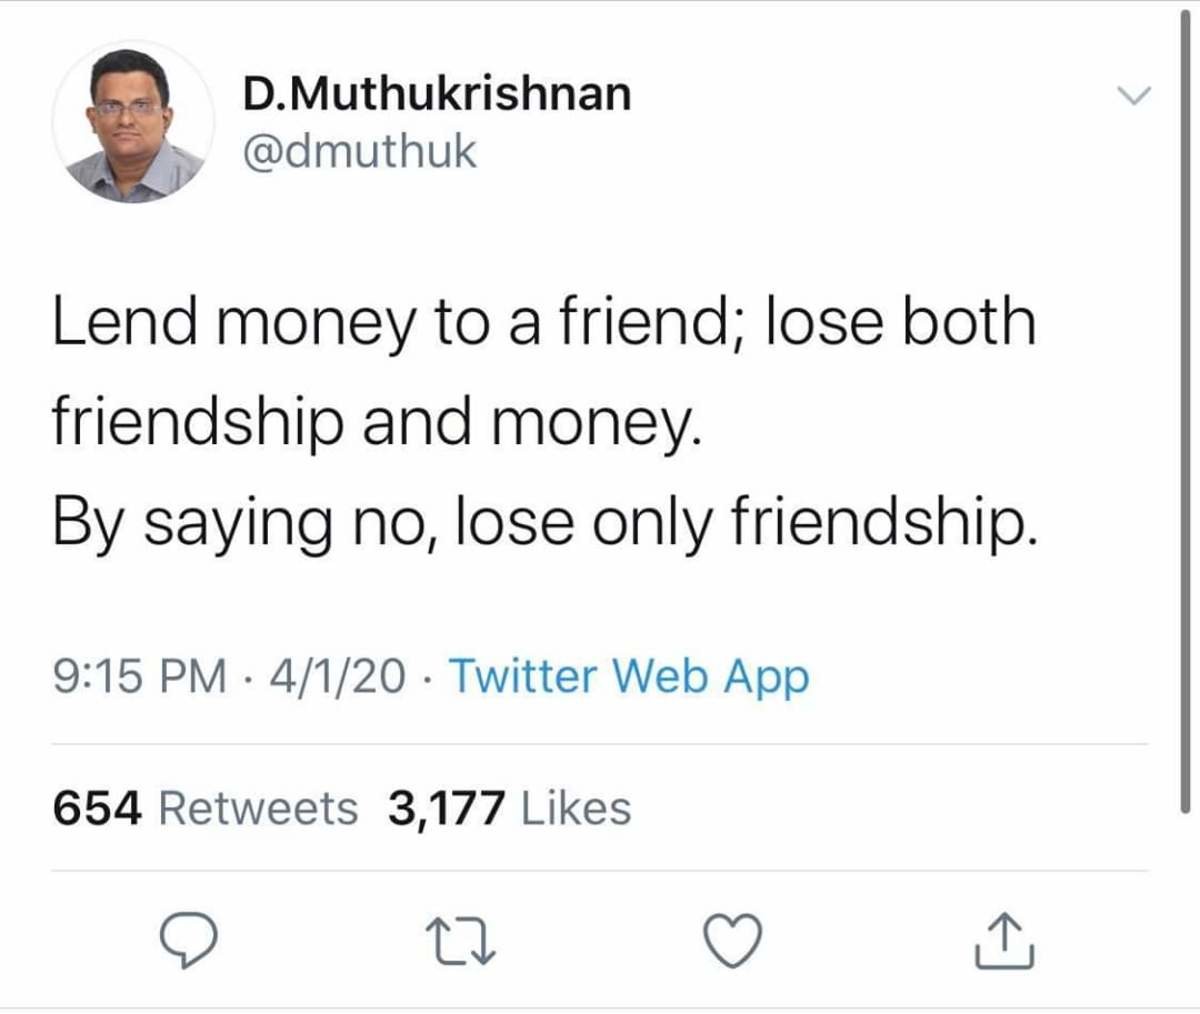 document - D.Muthukrishnan Lend money to a friend; lose both friendship and money. By saying no, lose only friendship. 4120 Twitter Web App 654 3,177 27